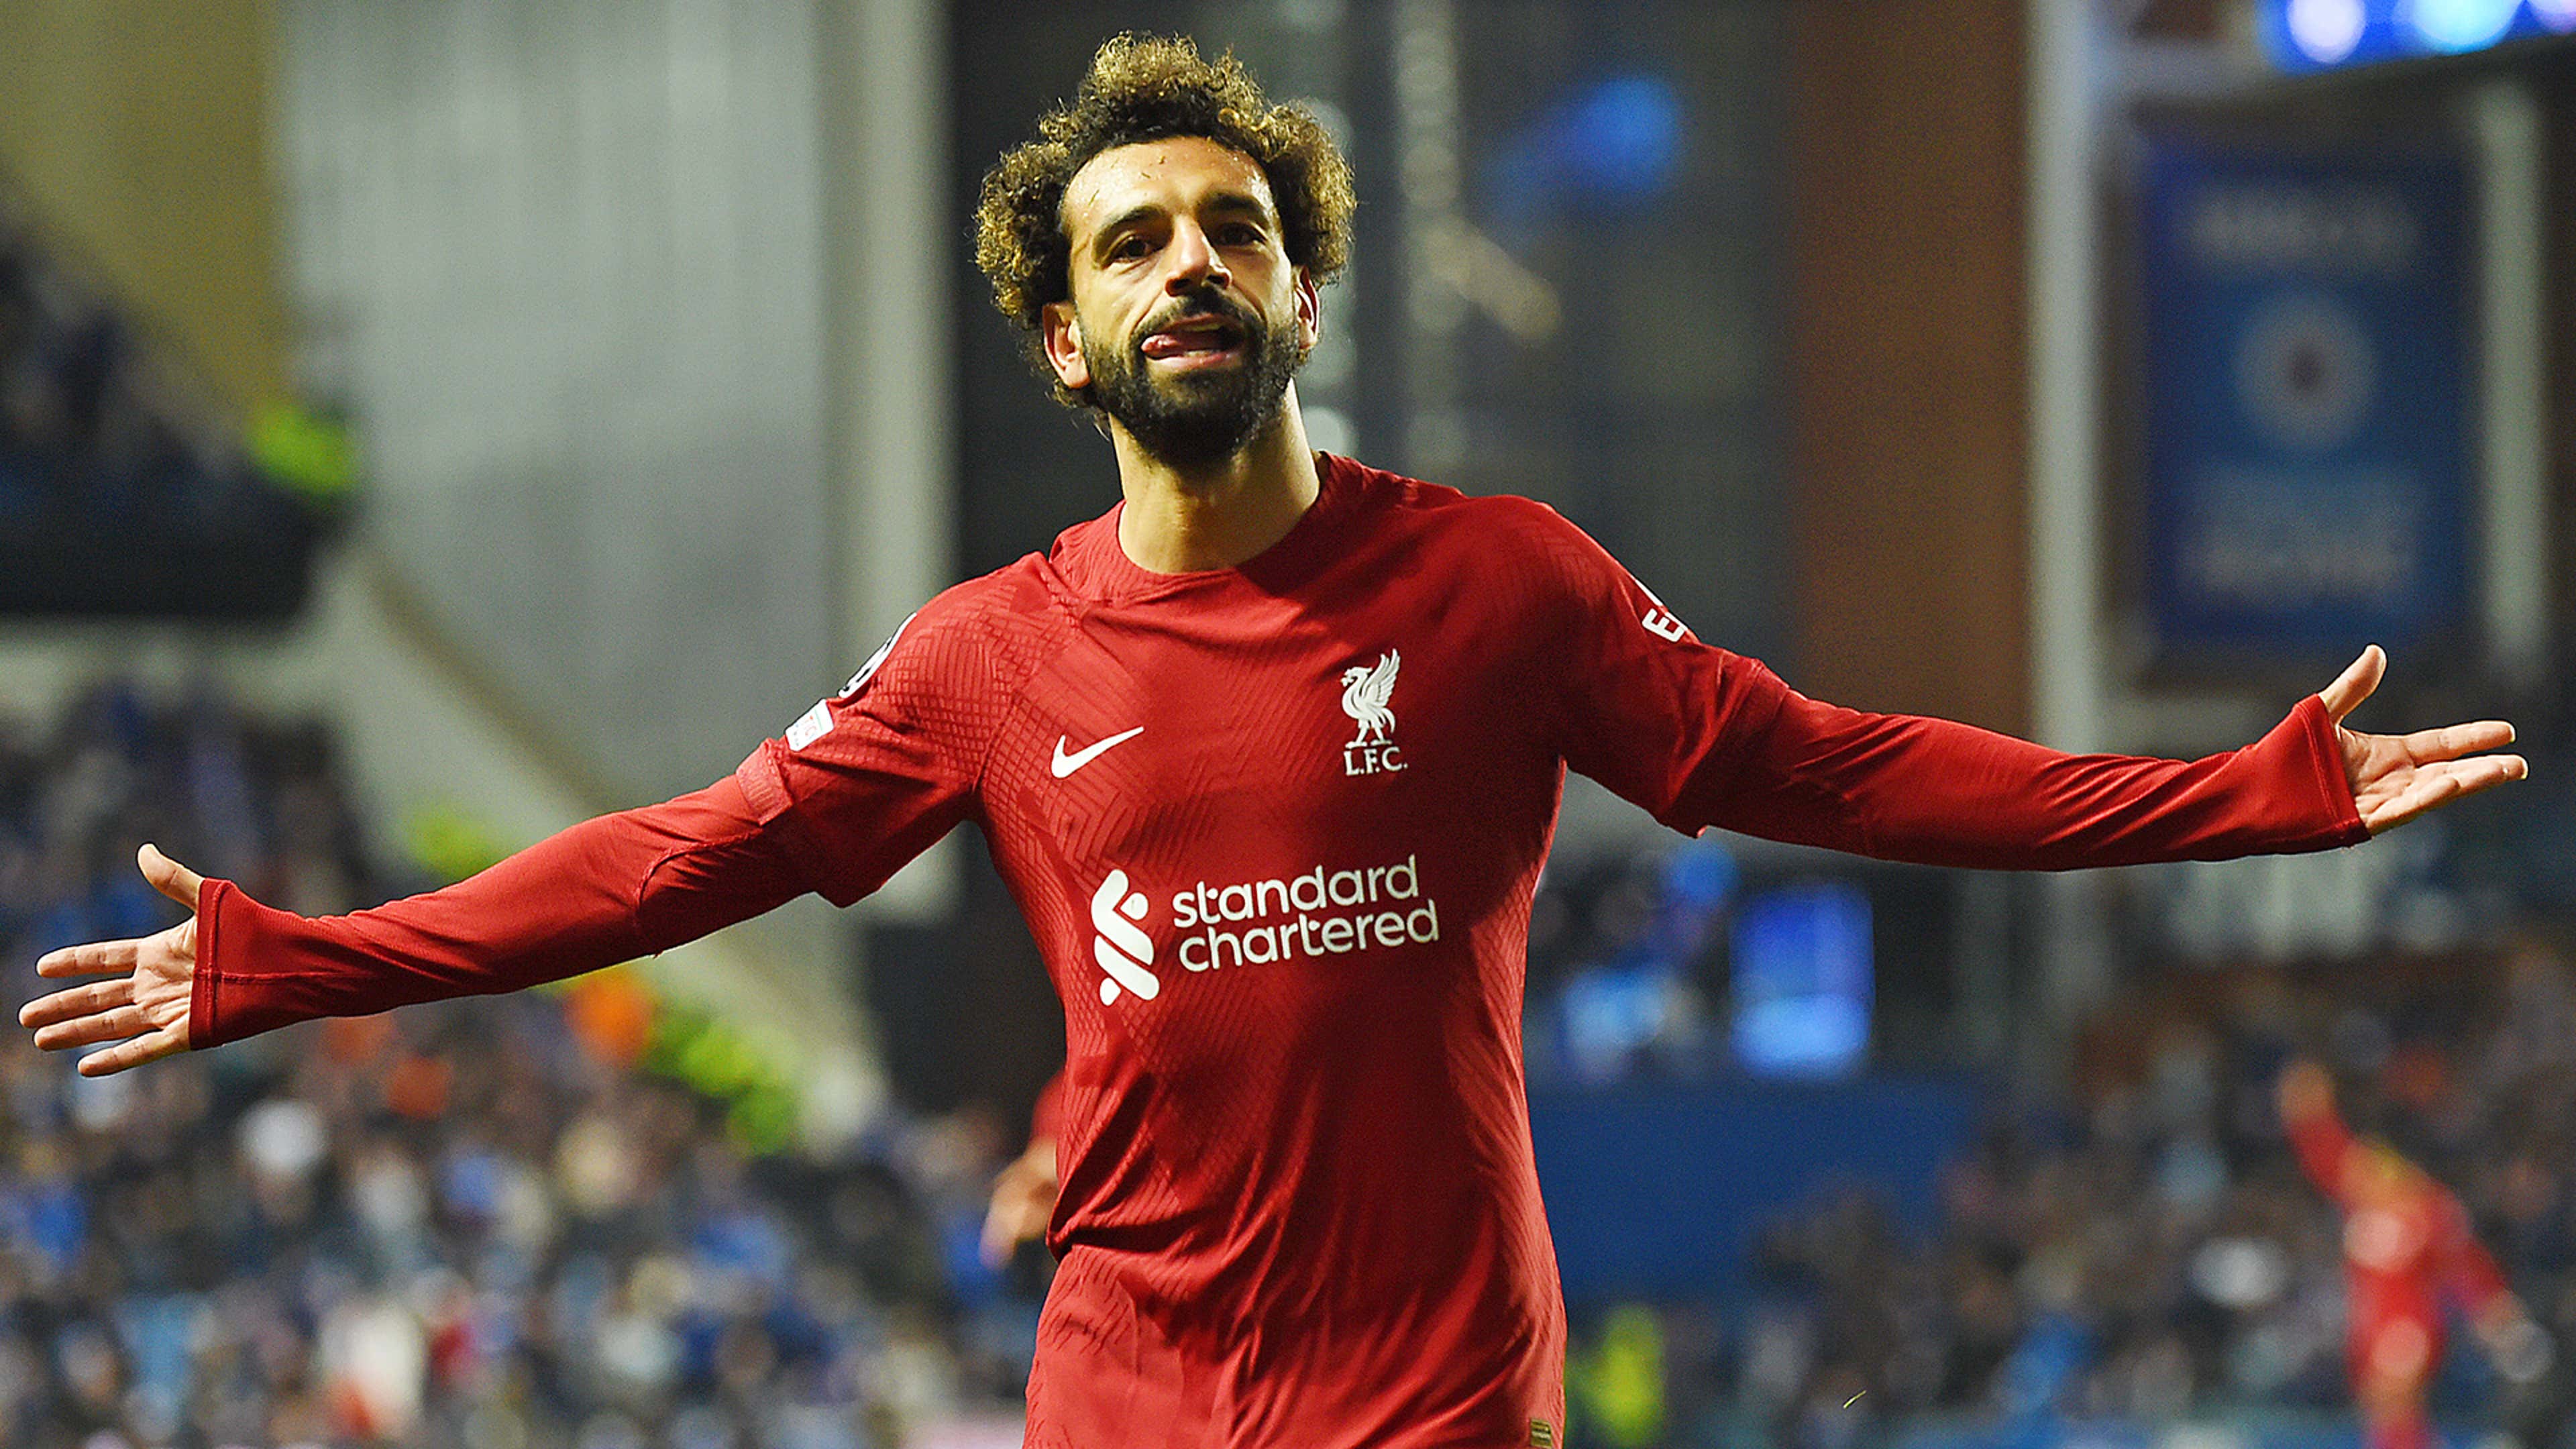 Al-Ittihad president talks about a move for Liverpool star Mohamed Salah.